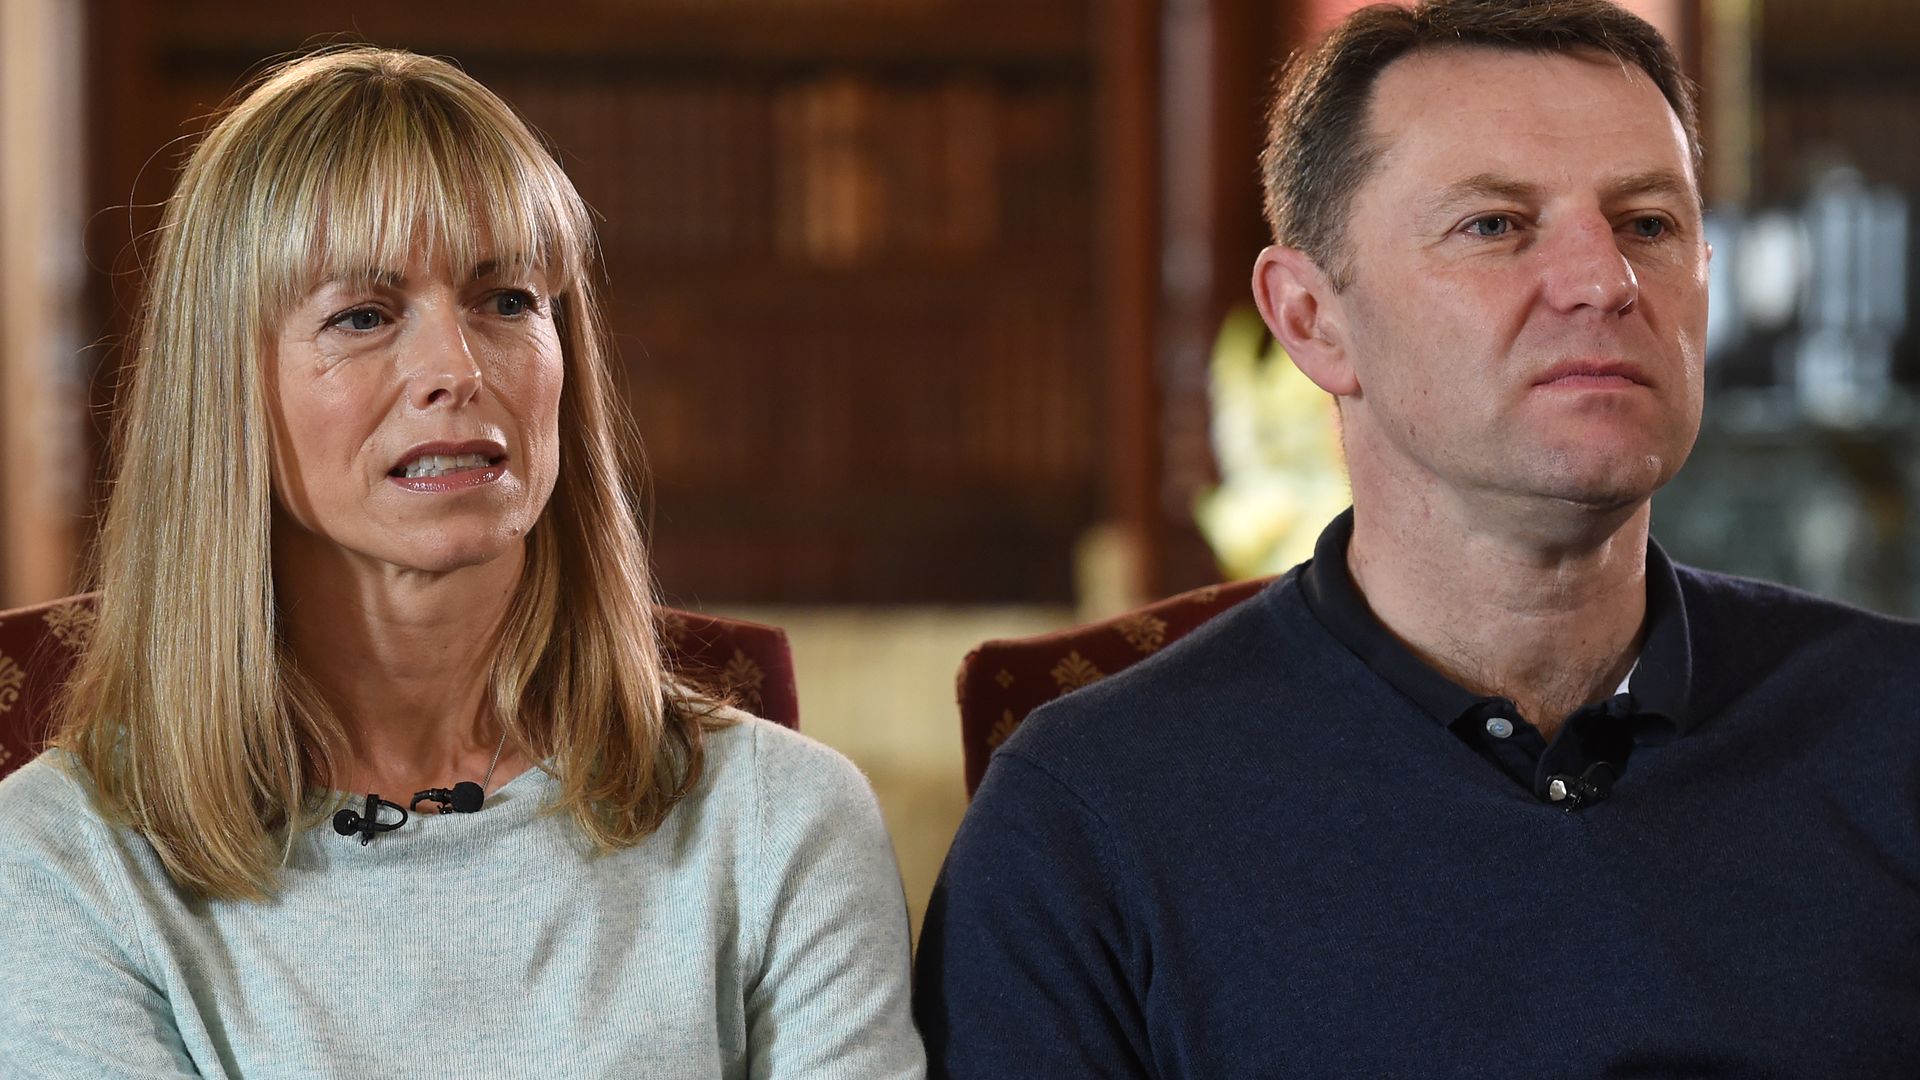 Kate and Gerry McCann look solemn as they discuss Madeleine's disappearance